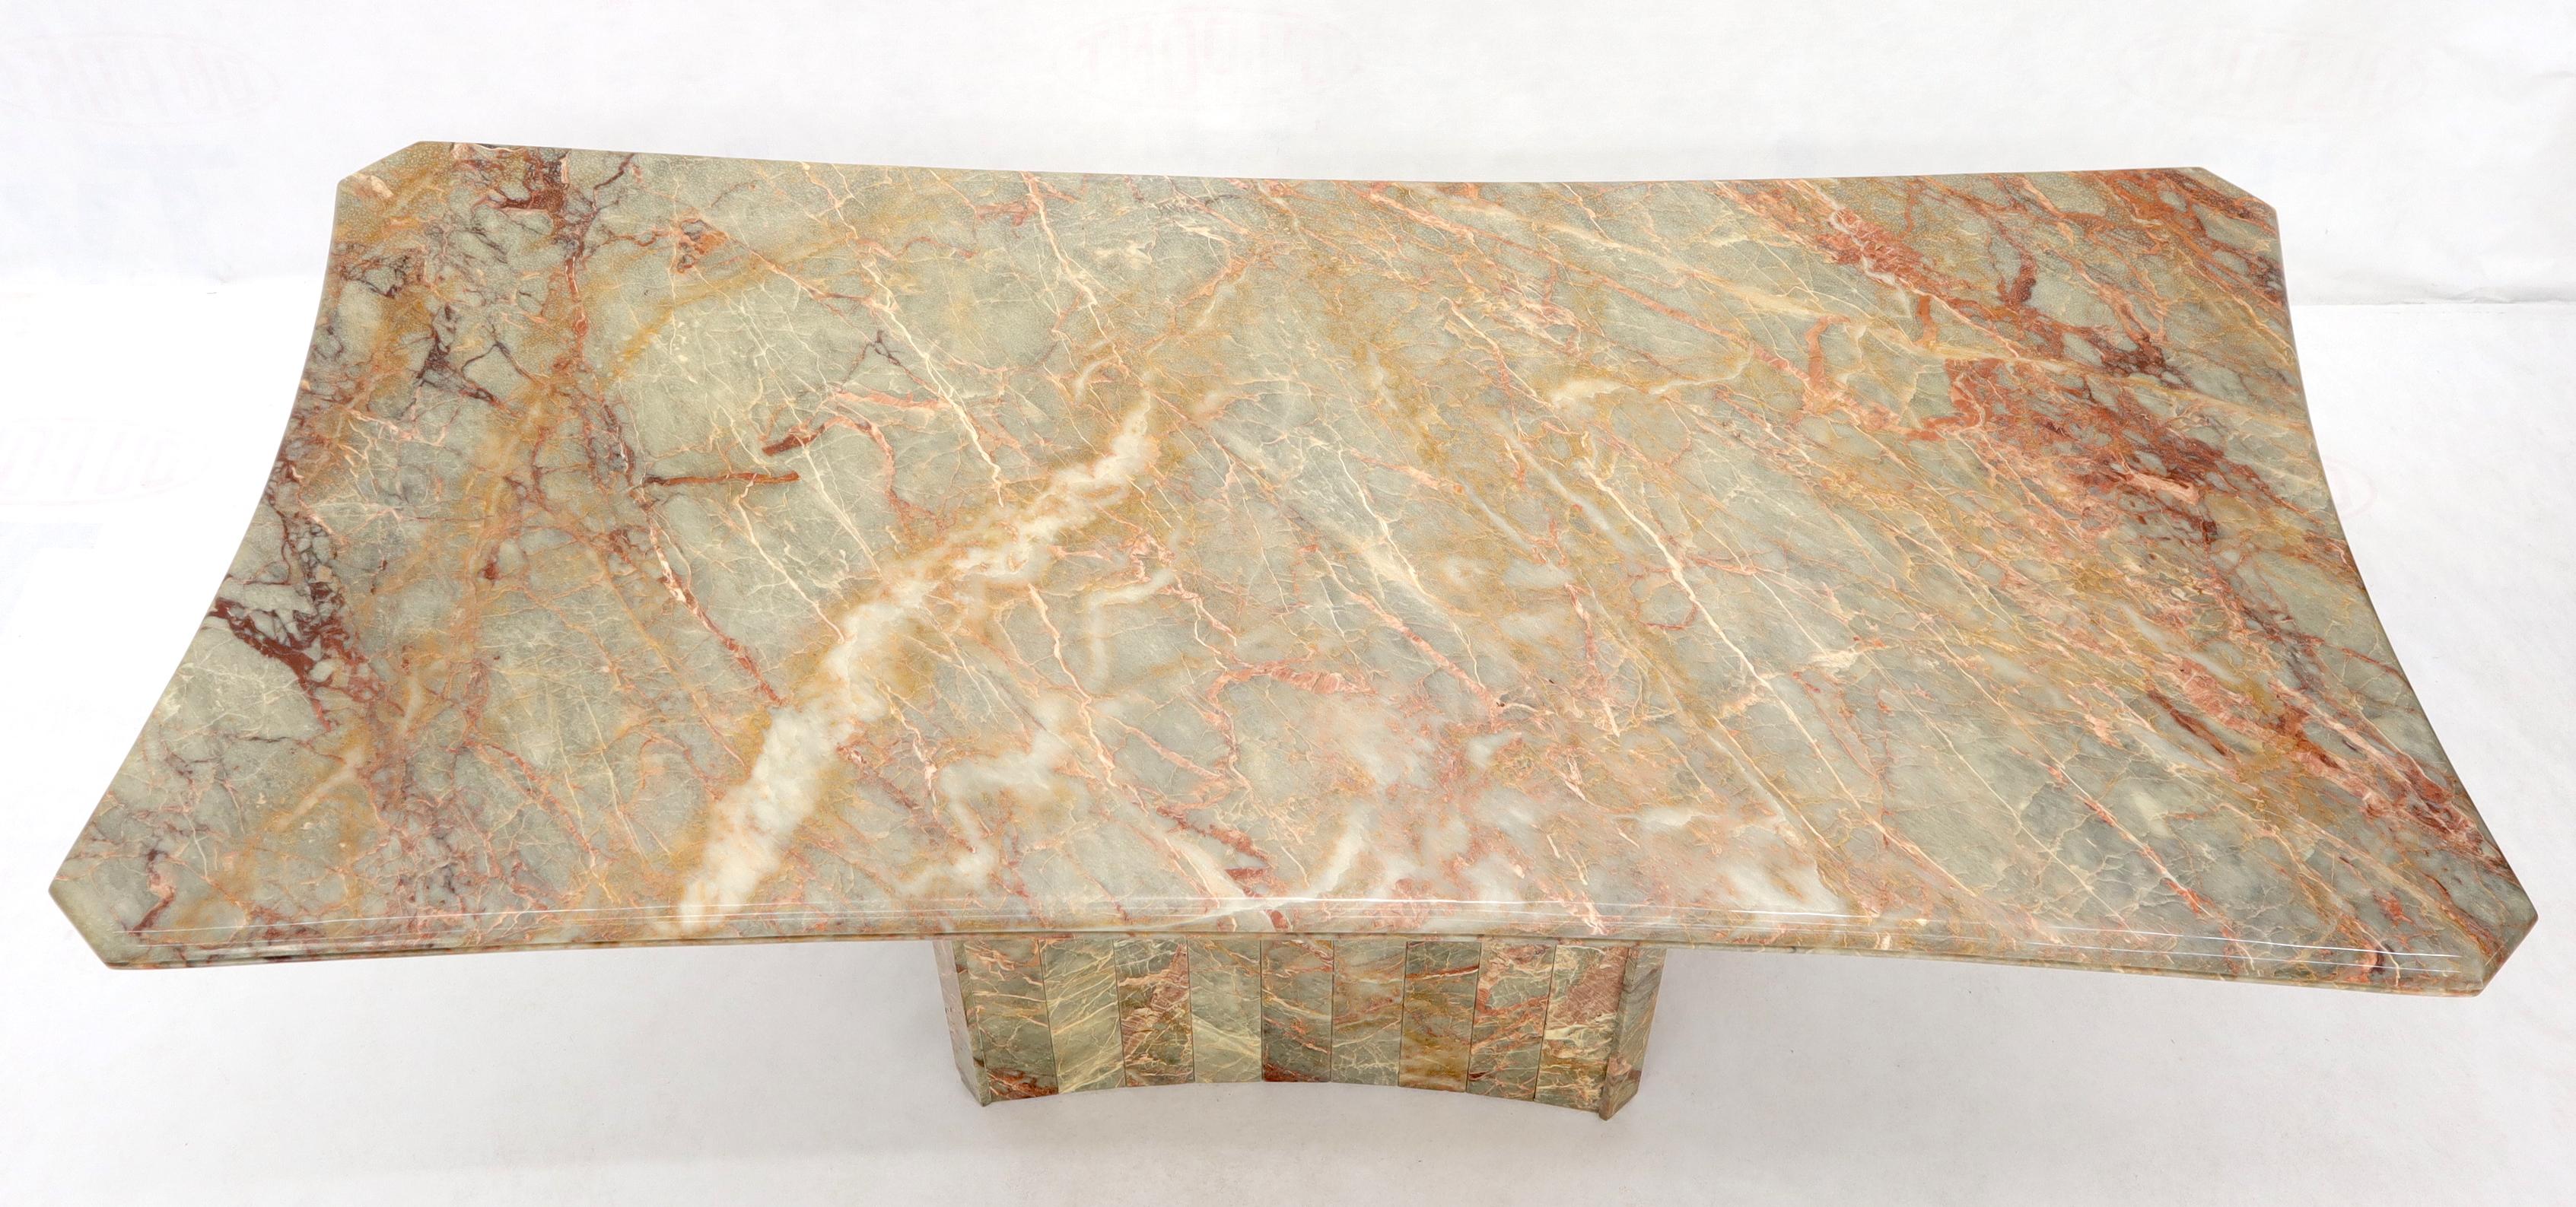 Concave Side Rectangular Pedestal Base Marble Dining Conference Table (Italienisch) im Angebot